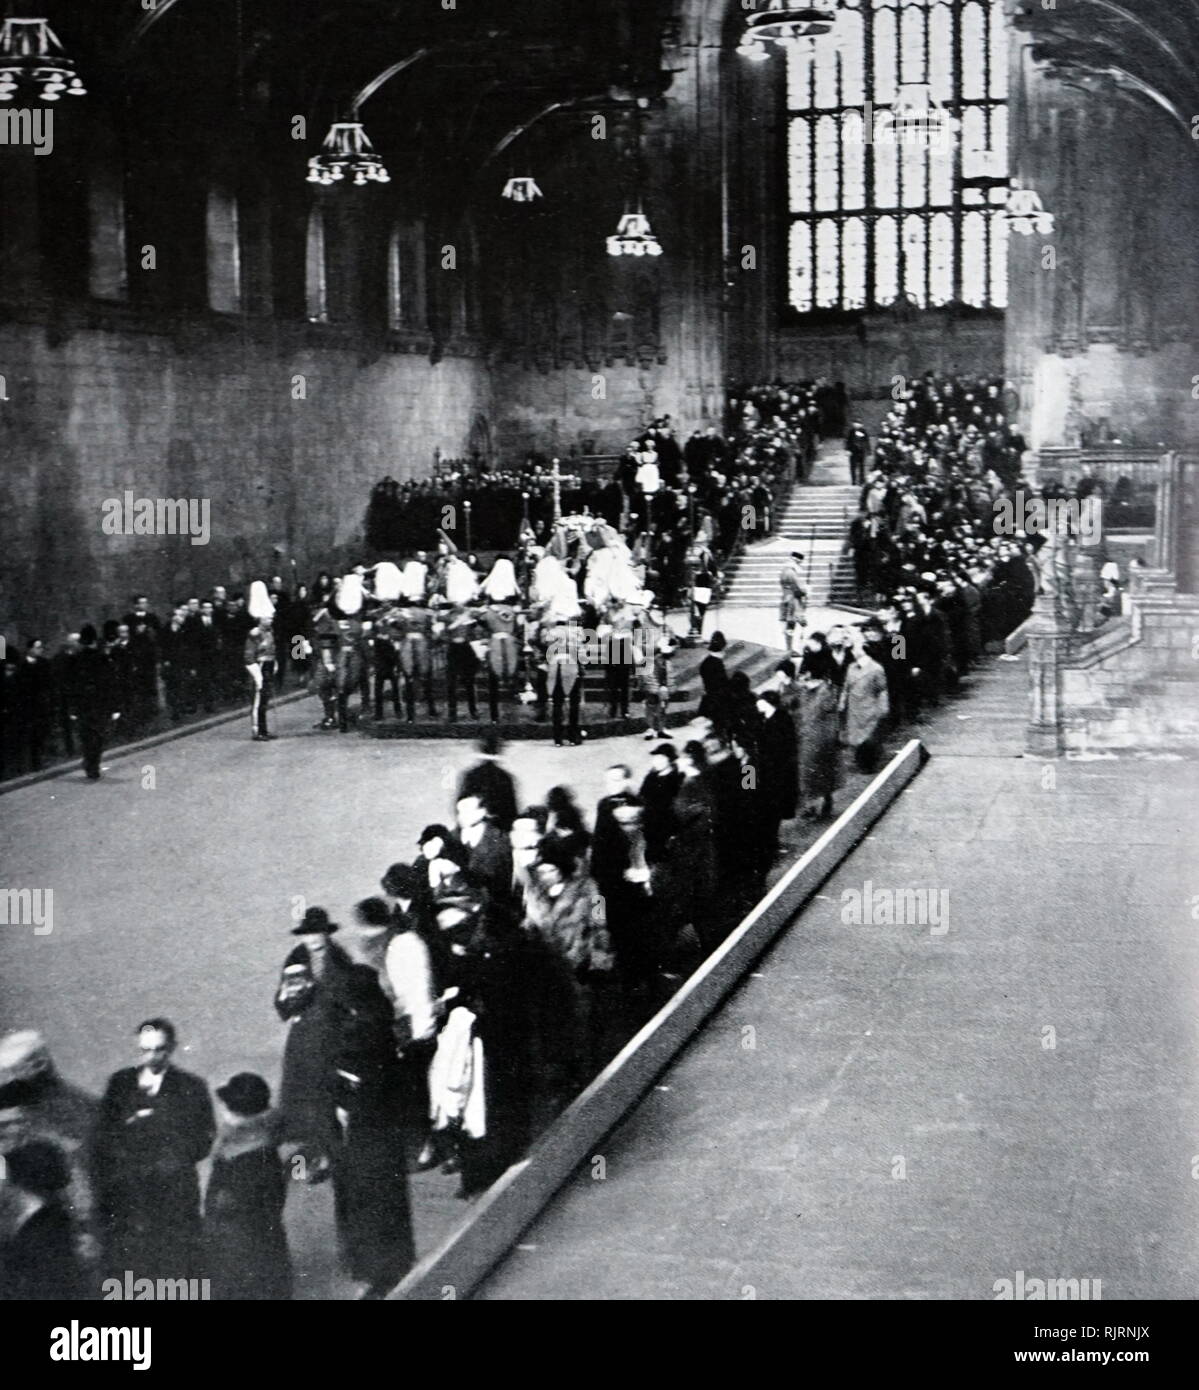 King George V lies in state in Westminster Hall, London as crowds pass his coffin. Funeral of King George V (1936); King of the United Kingdom and the British Dominions, and Emperor of India, from 6 May 1910 until his death in 1936 Stock Photo